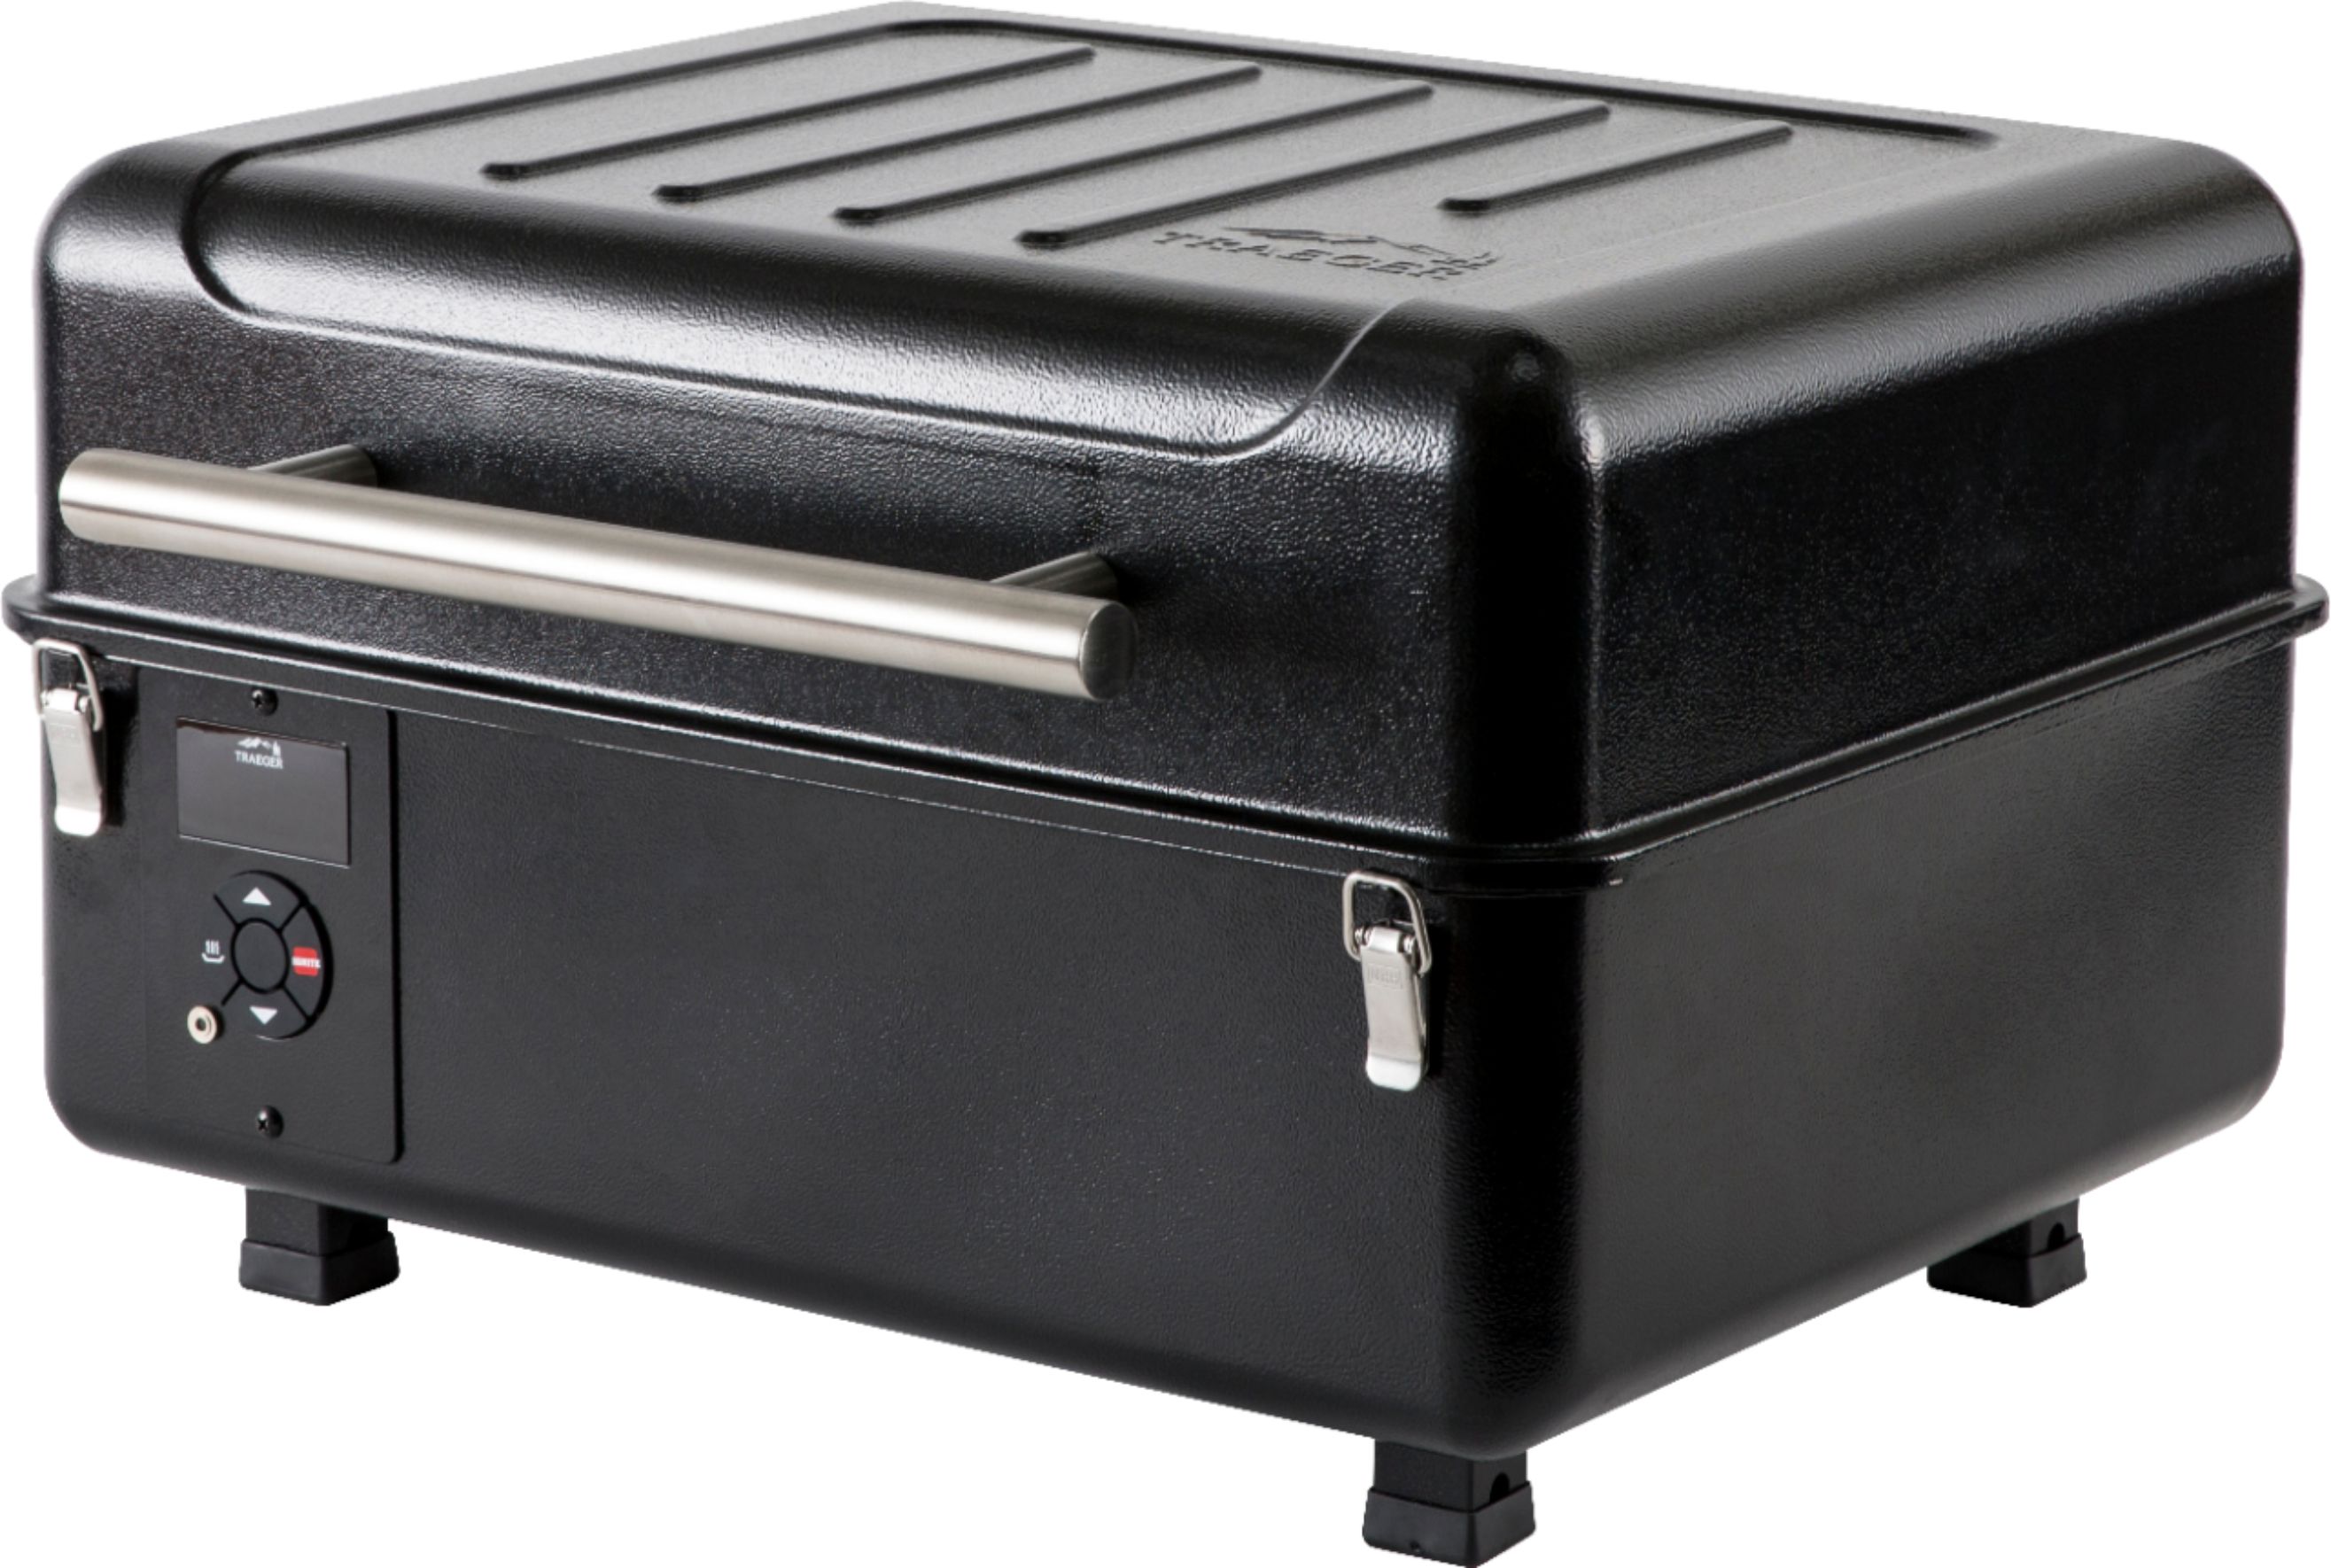 Angle View: Cuisinart - Professional Portable Gas Grill - Stainless Steel